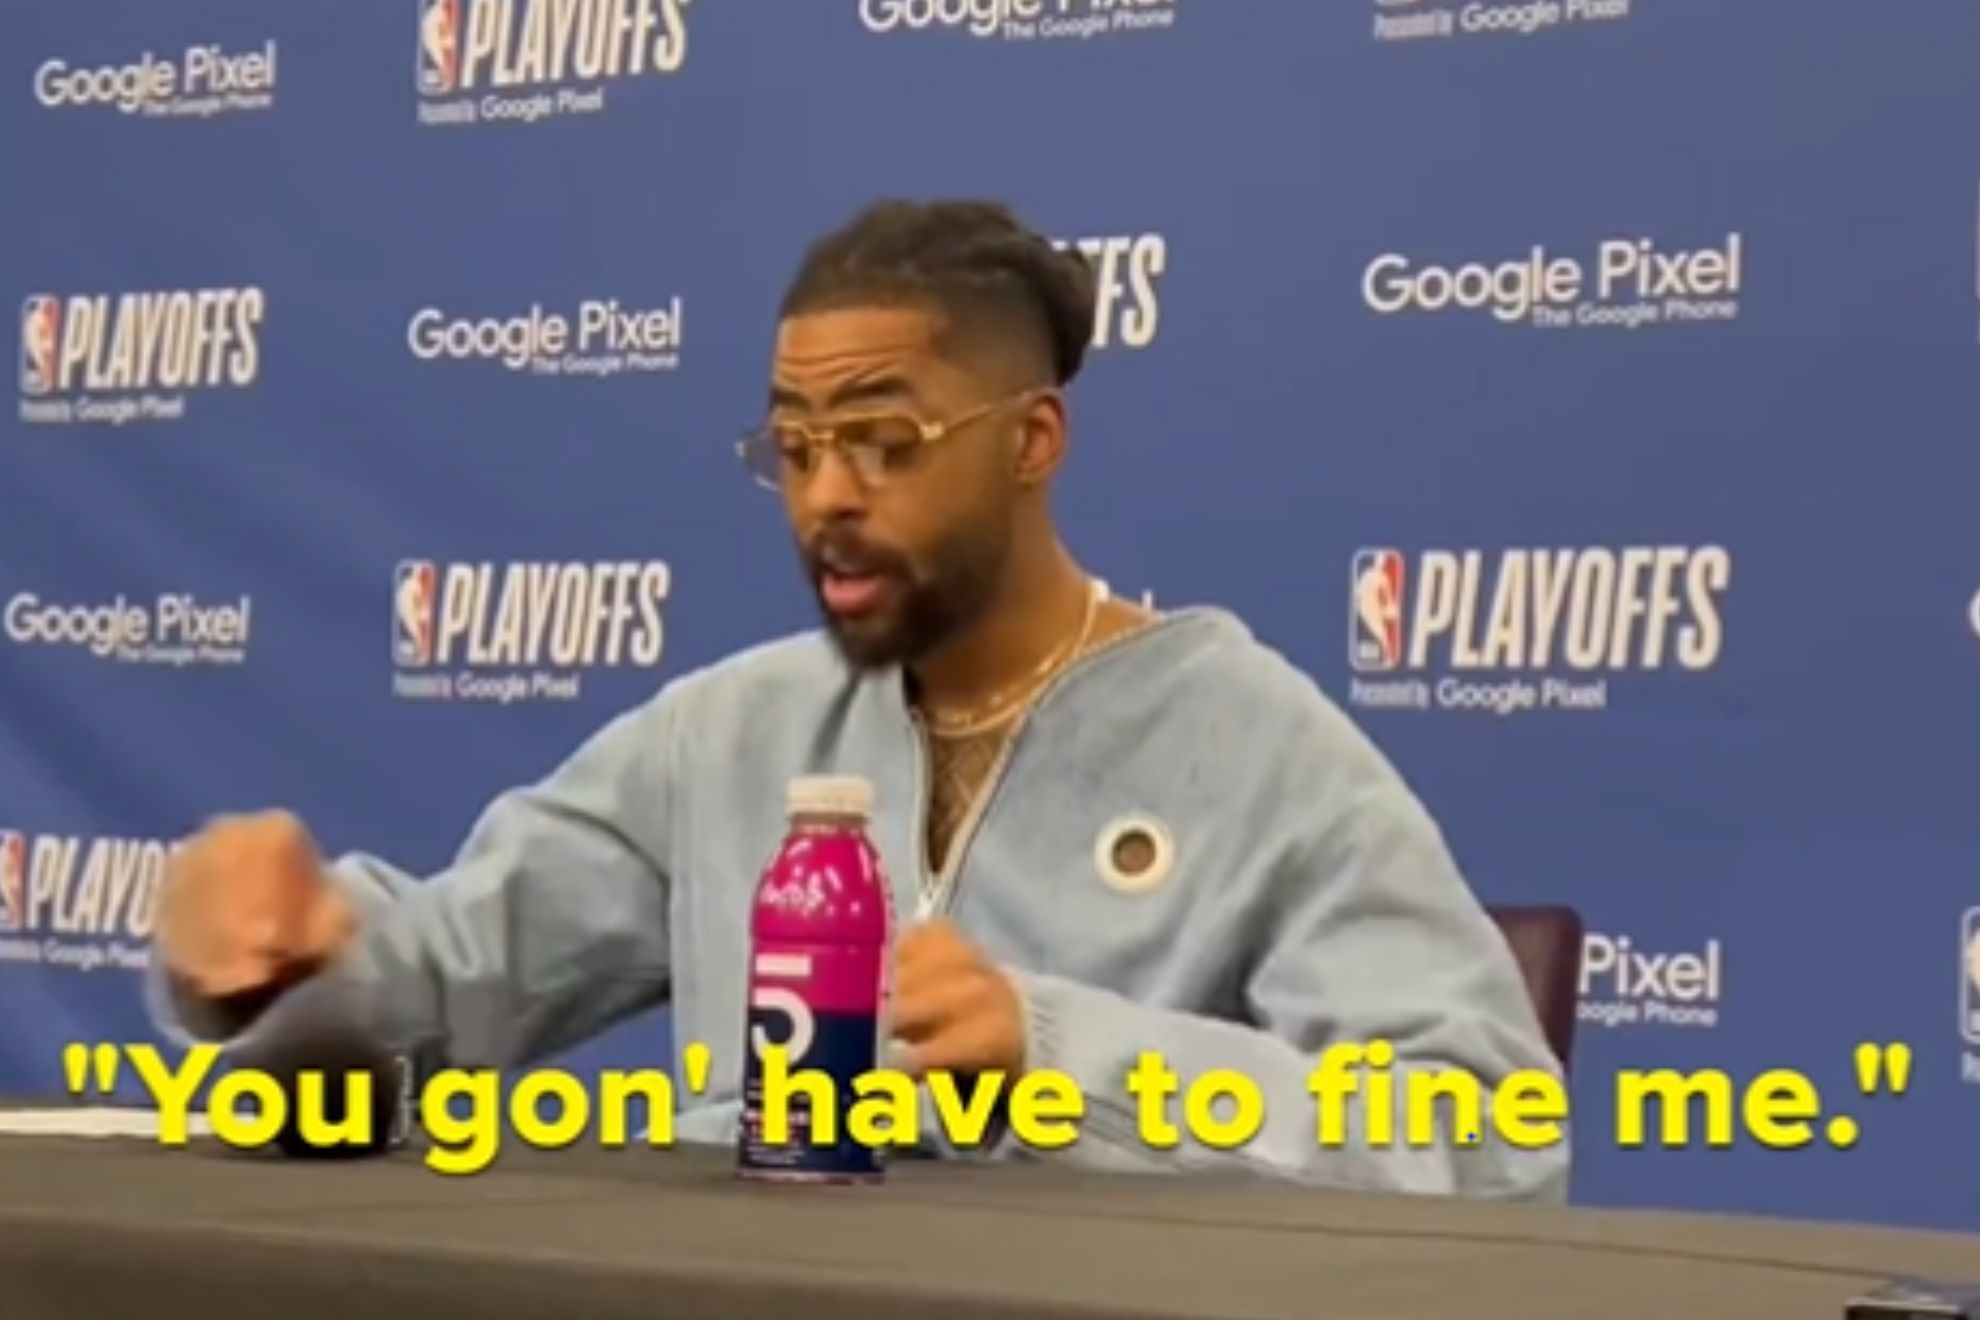 DAngelo Russell inadvertently creates genius marketing campaign for NBA rival